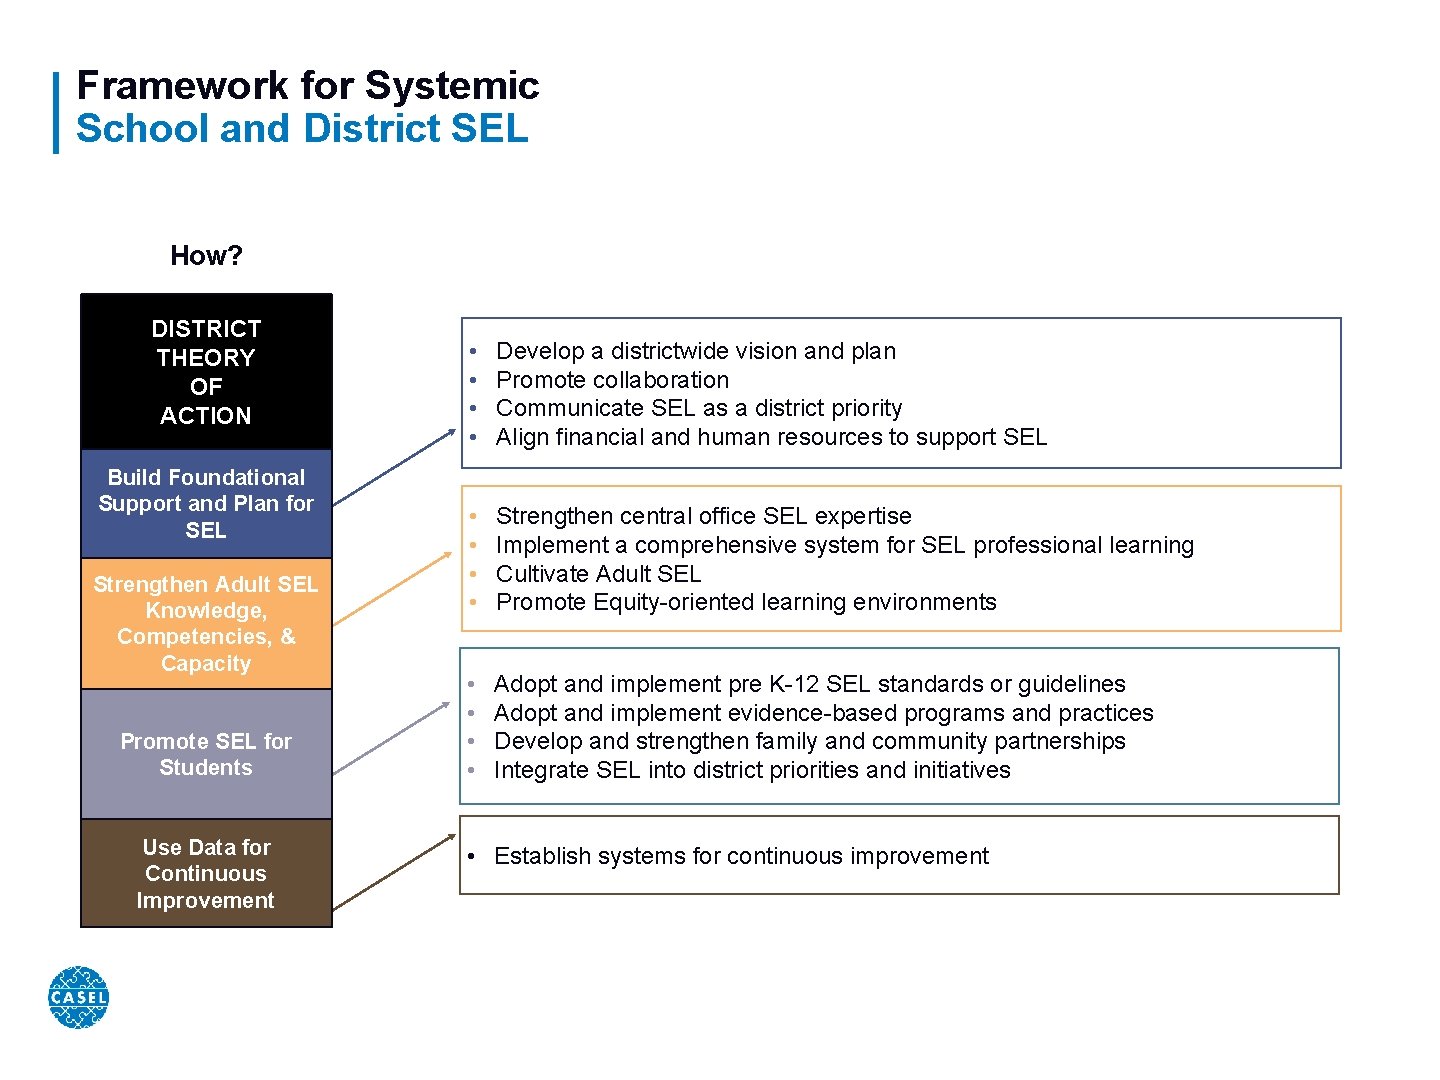 Framework for Systemic School and District SEL How? DISTRICT THEORY OF ACTION Build Foundational